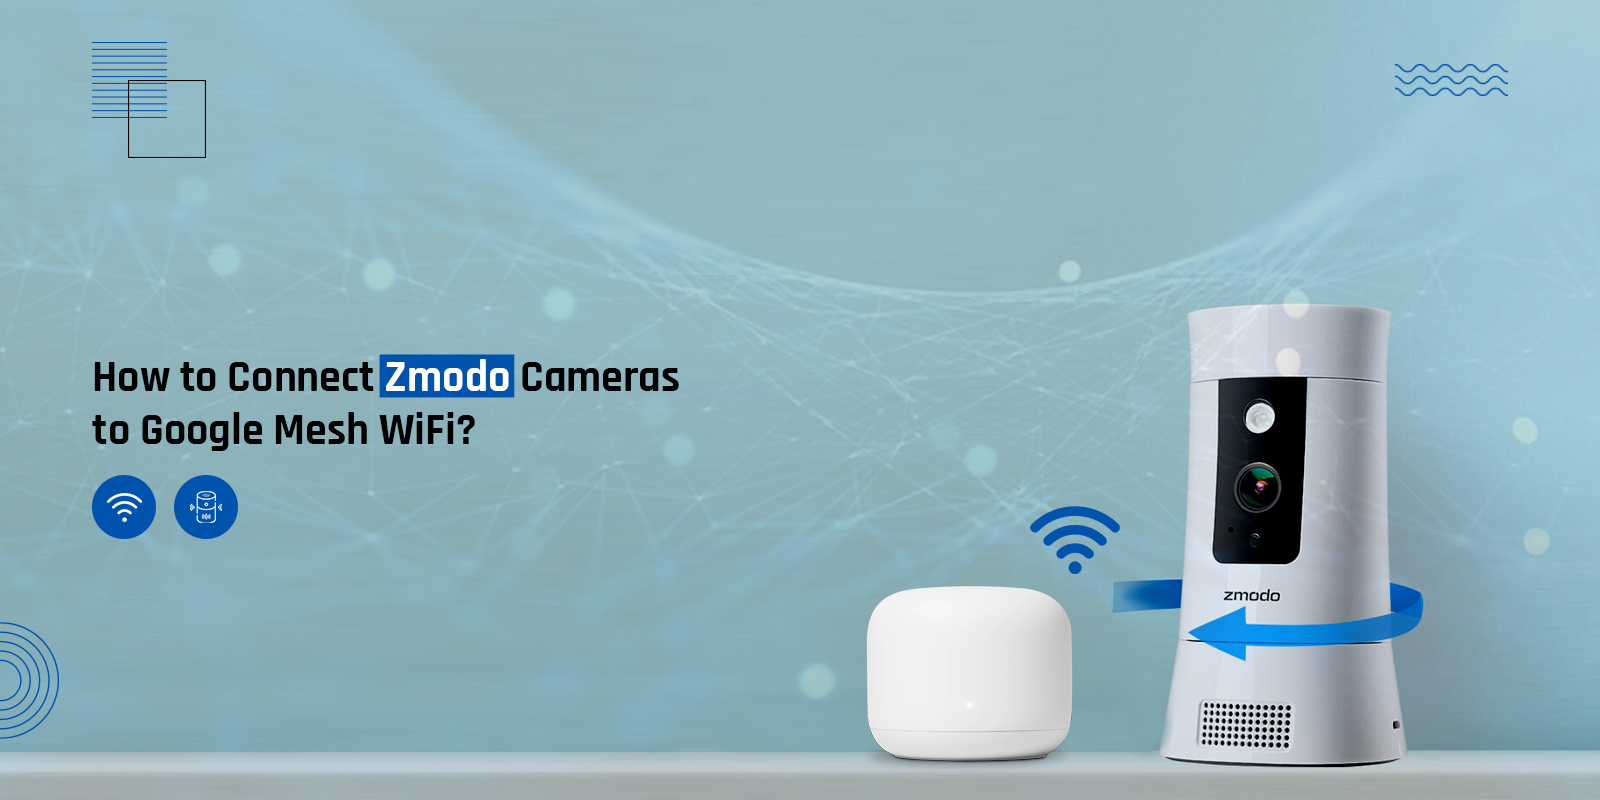 How to Connect Zmodo Cameras to Google Mesh WiFi?